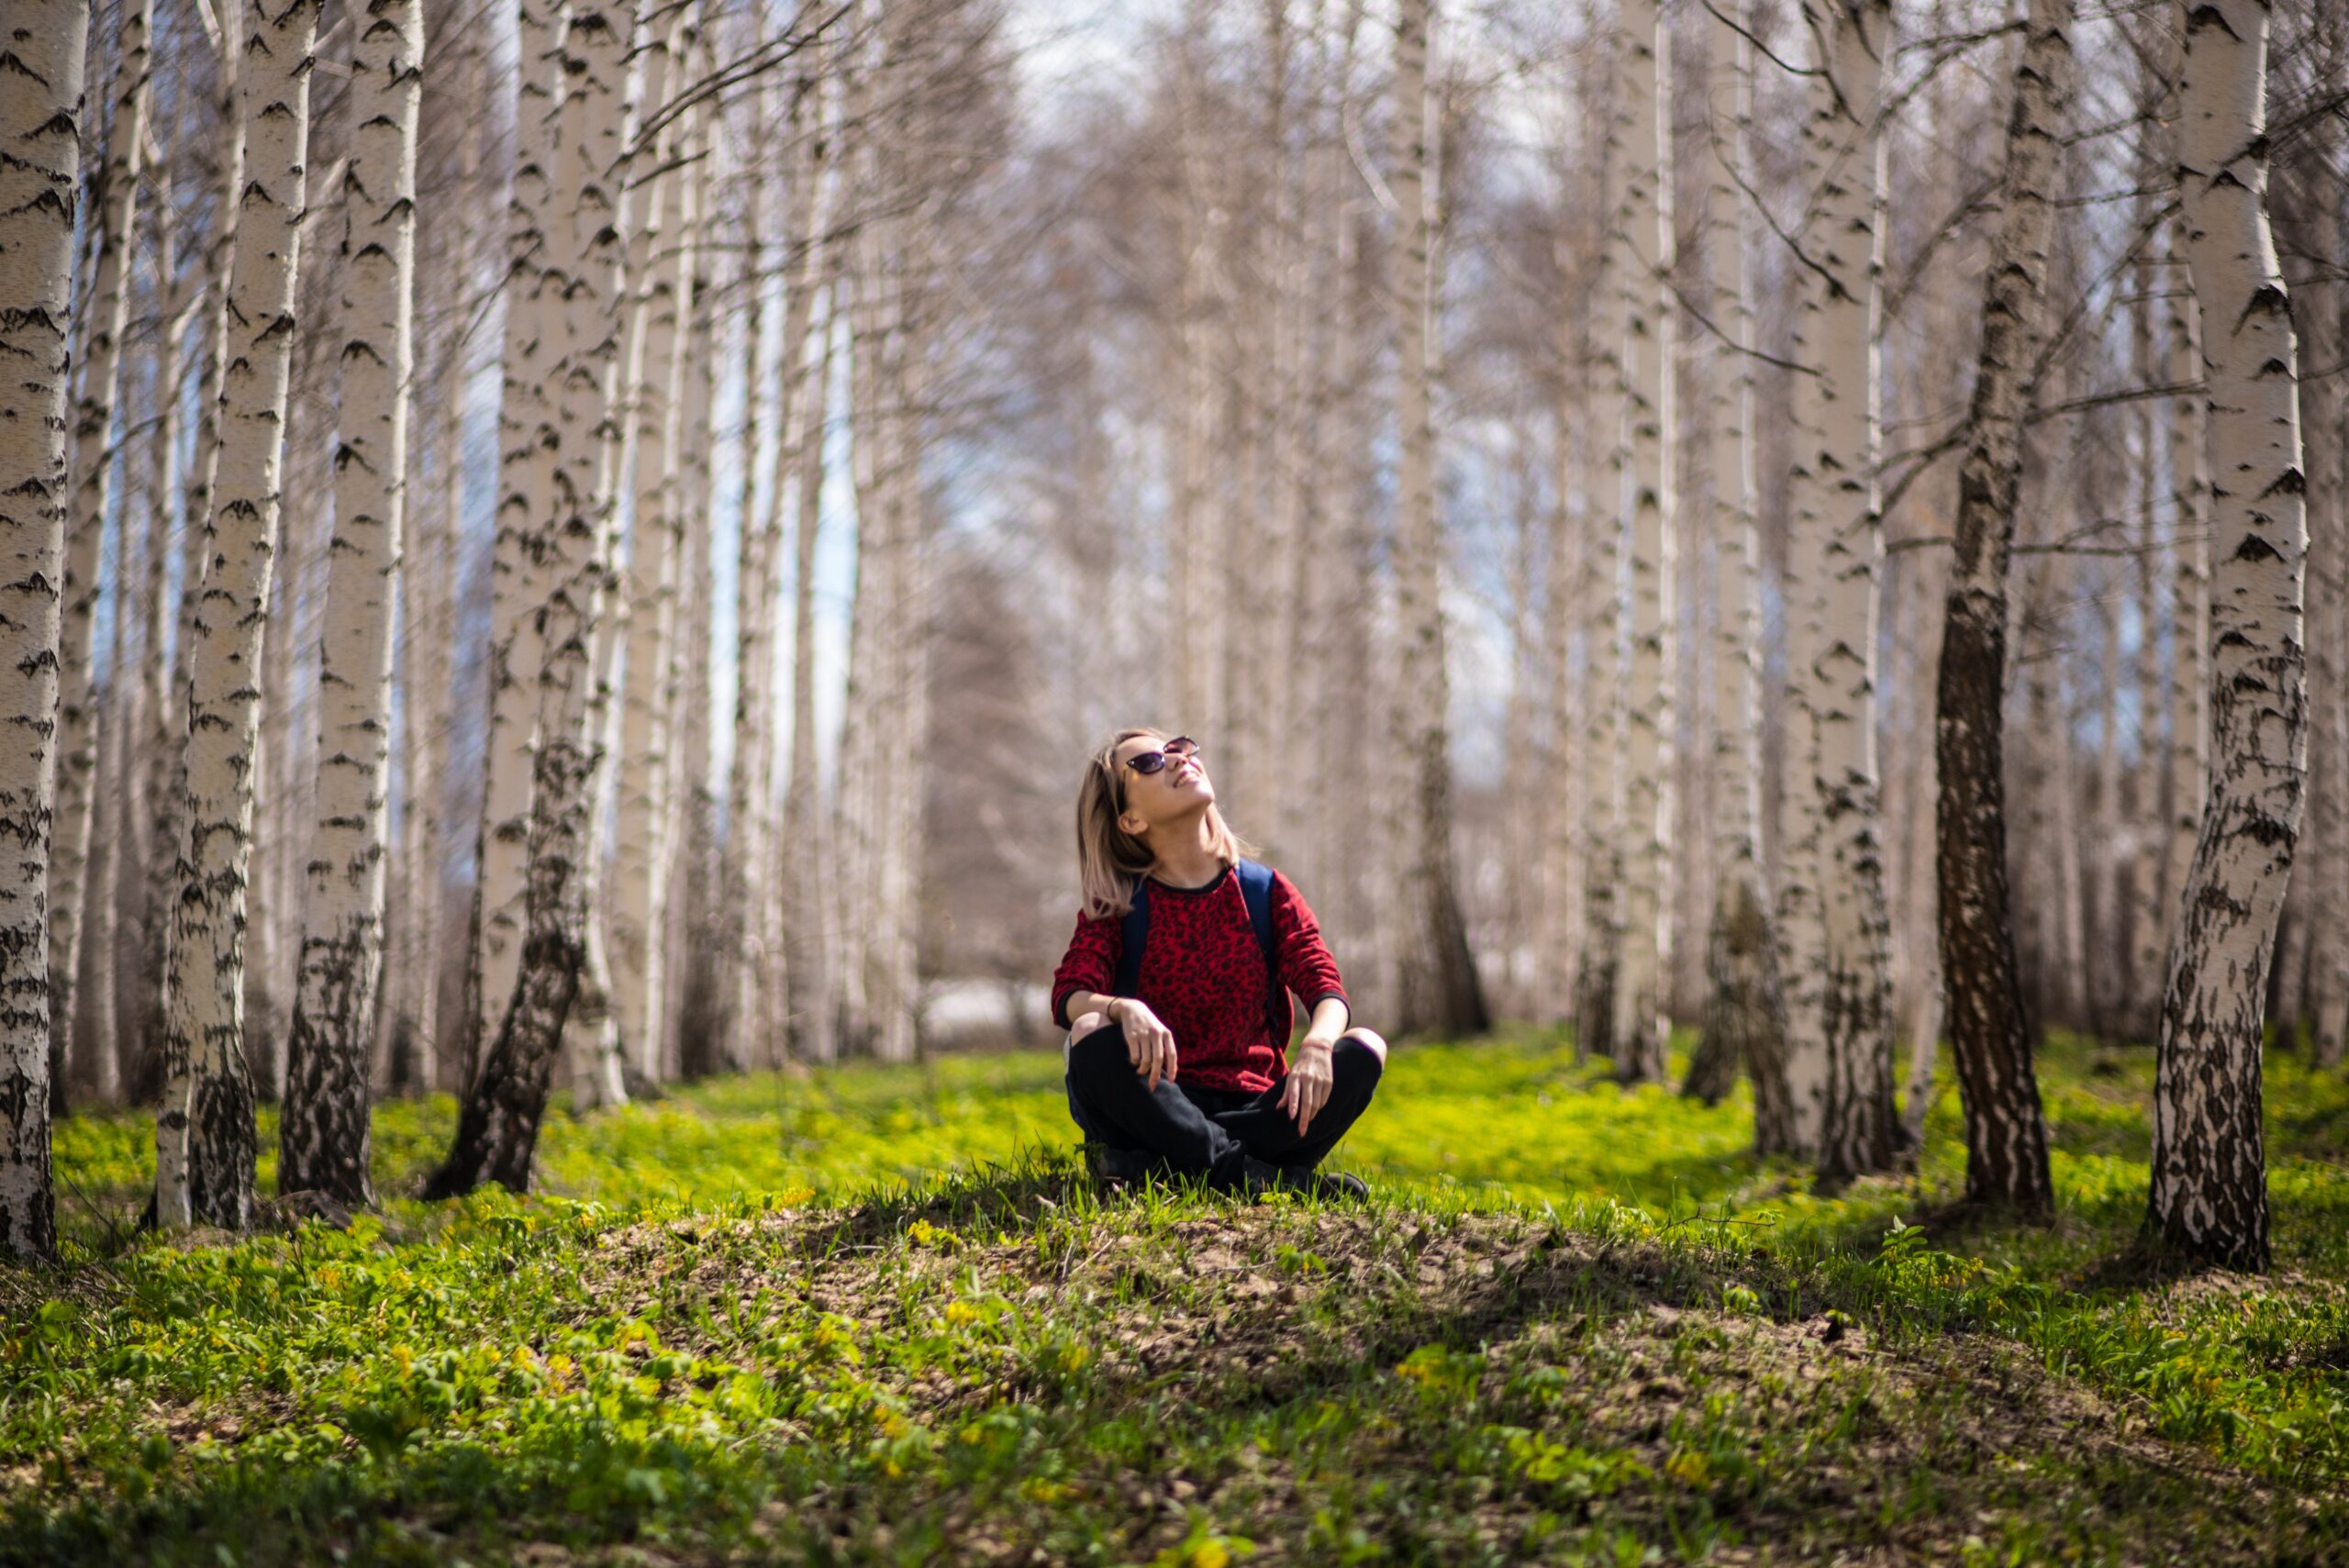 A smiling woman sits in a forest of aspen trees.